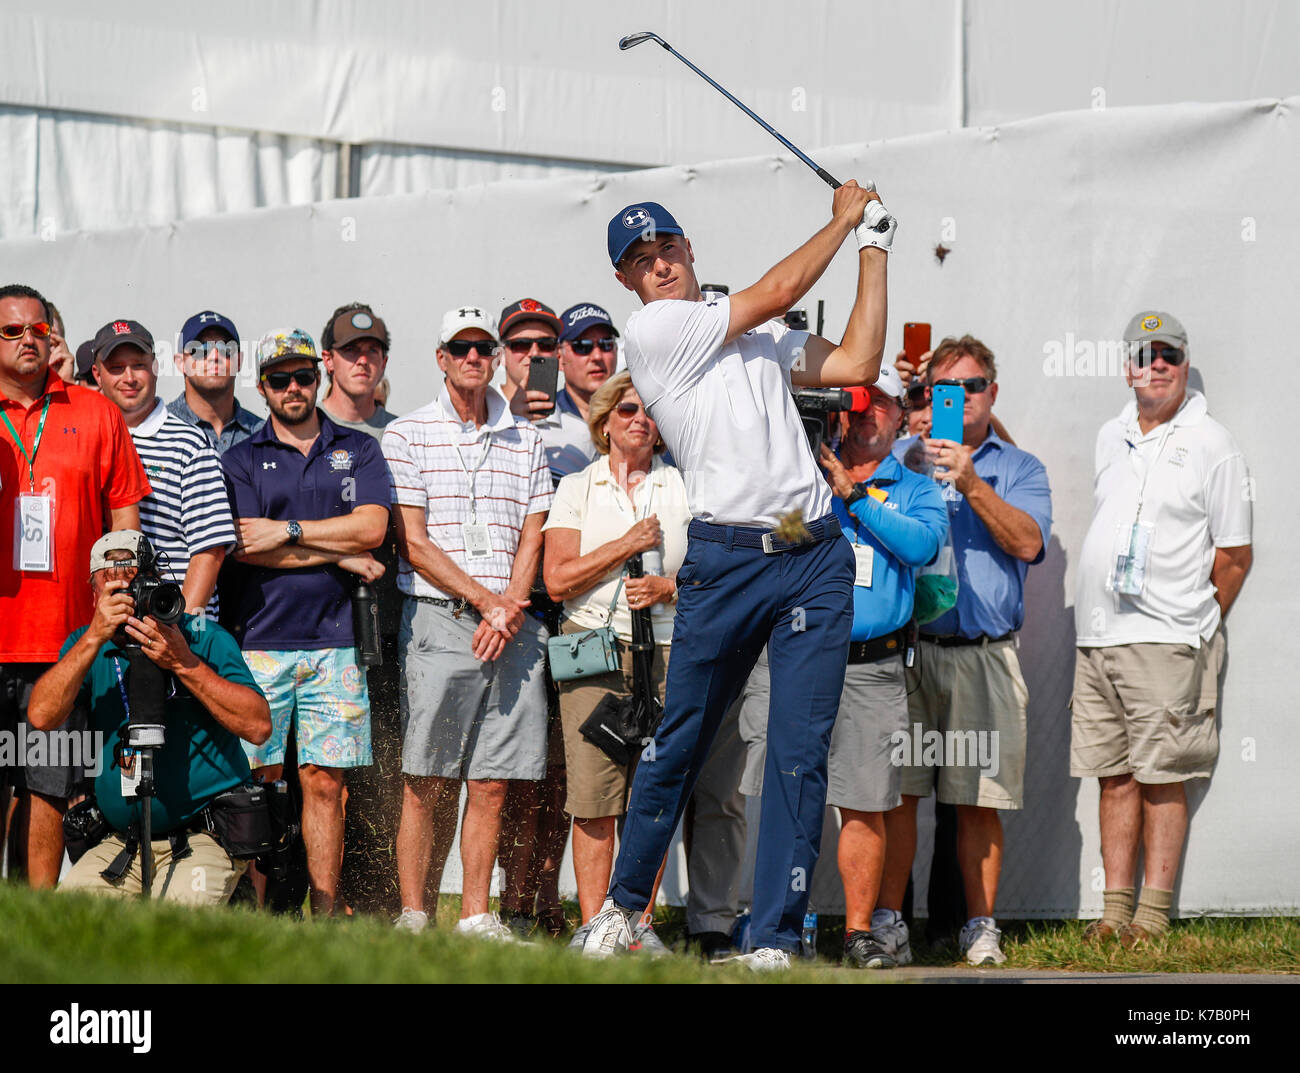 Chicago, USA. 16th Sep, 2017. Jordan Spieth competes during the BMW Championships at the Conway Farms Golf Course in Lake Forest of Illinois, the United States, on Sept, 15, 2017. Credit: Joel Lerner/Xinhua/Alamy Live News Stock Photo